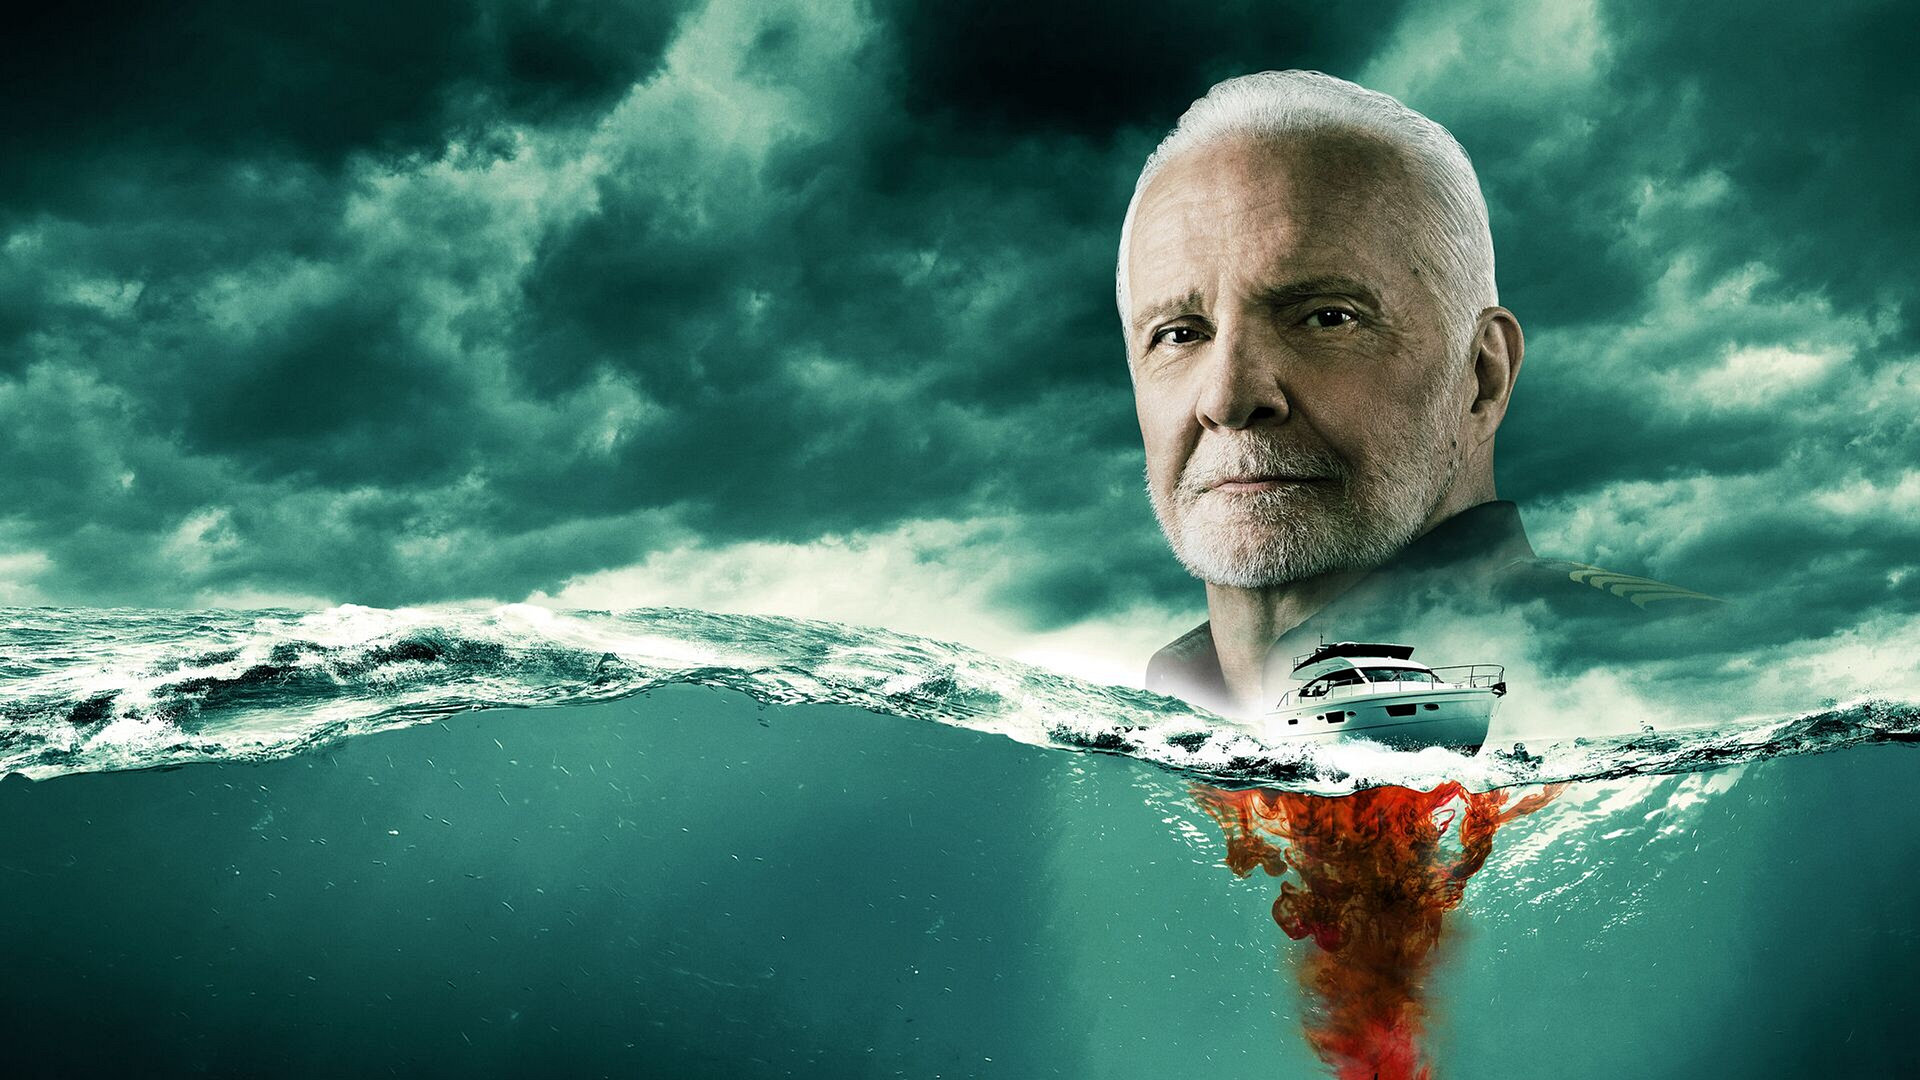 Deadly Waters With Captain Lee